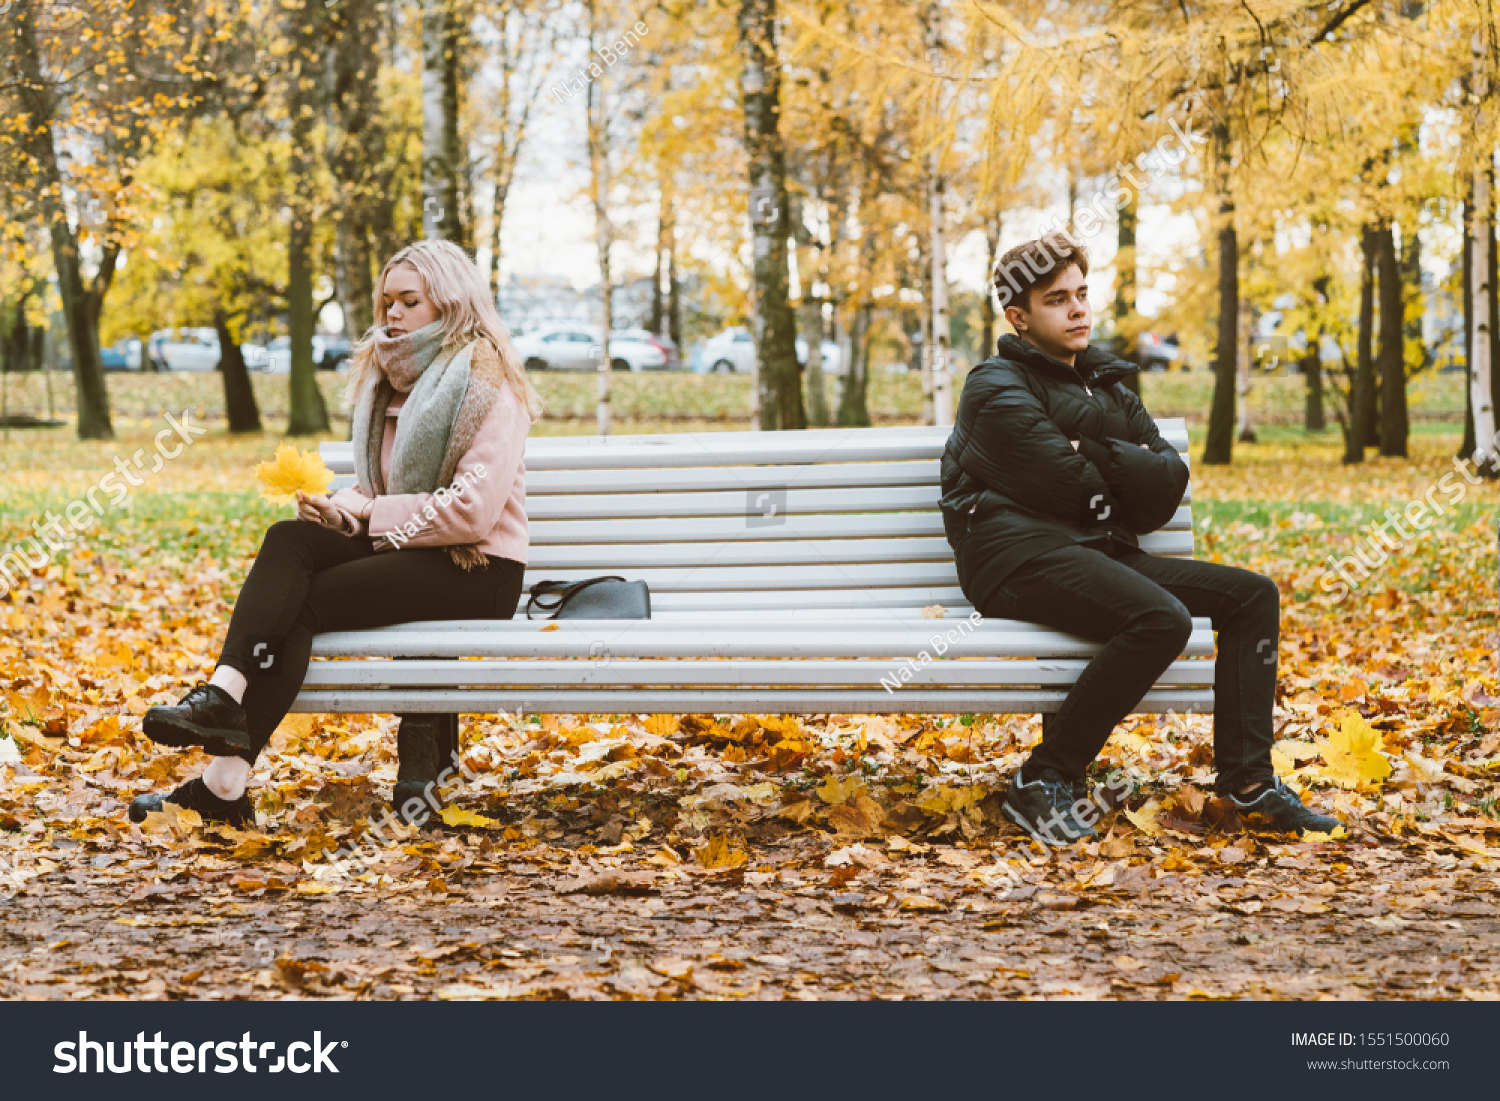 Two teenagers in love in a quarrel. A brunette boy and a blonde girl are sitting on opposite ends of the benches, their backs to each other, do not want to talk and talk. Teenage Difficulty Concept #1551500060